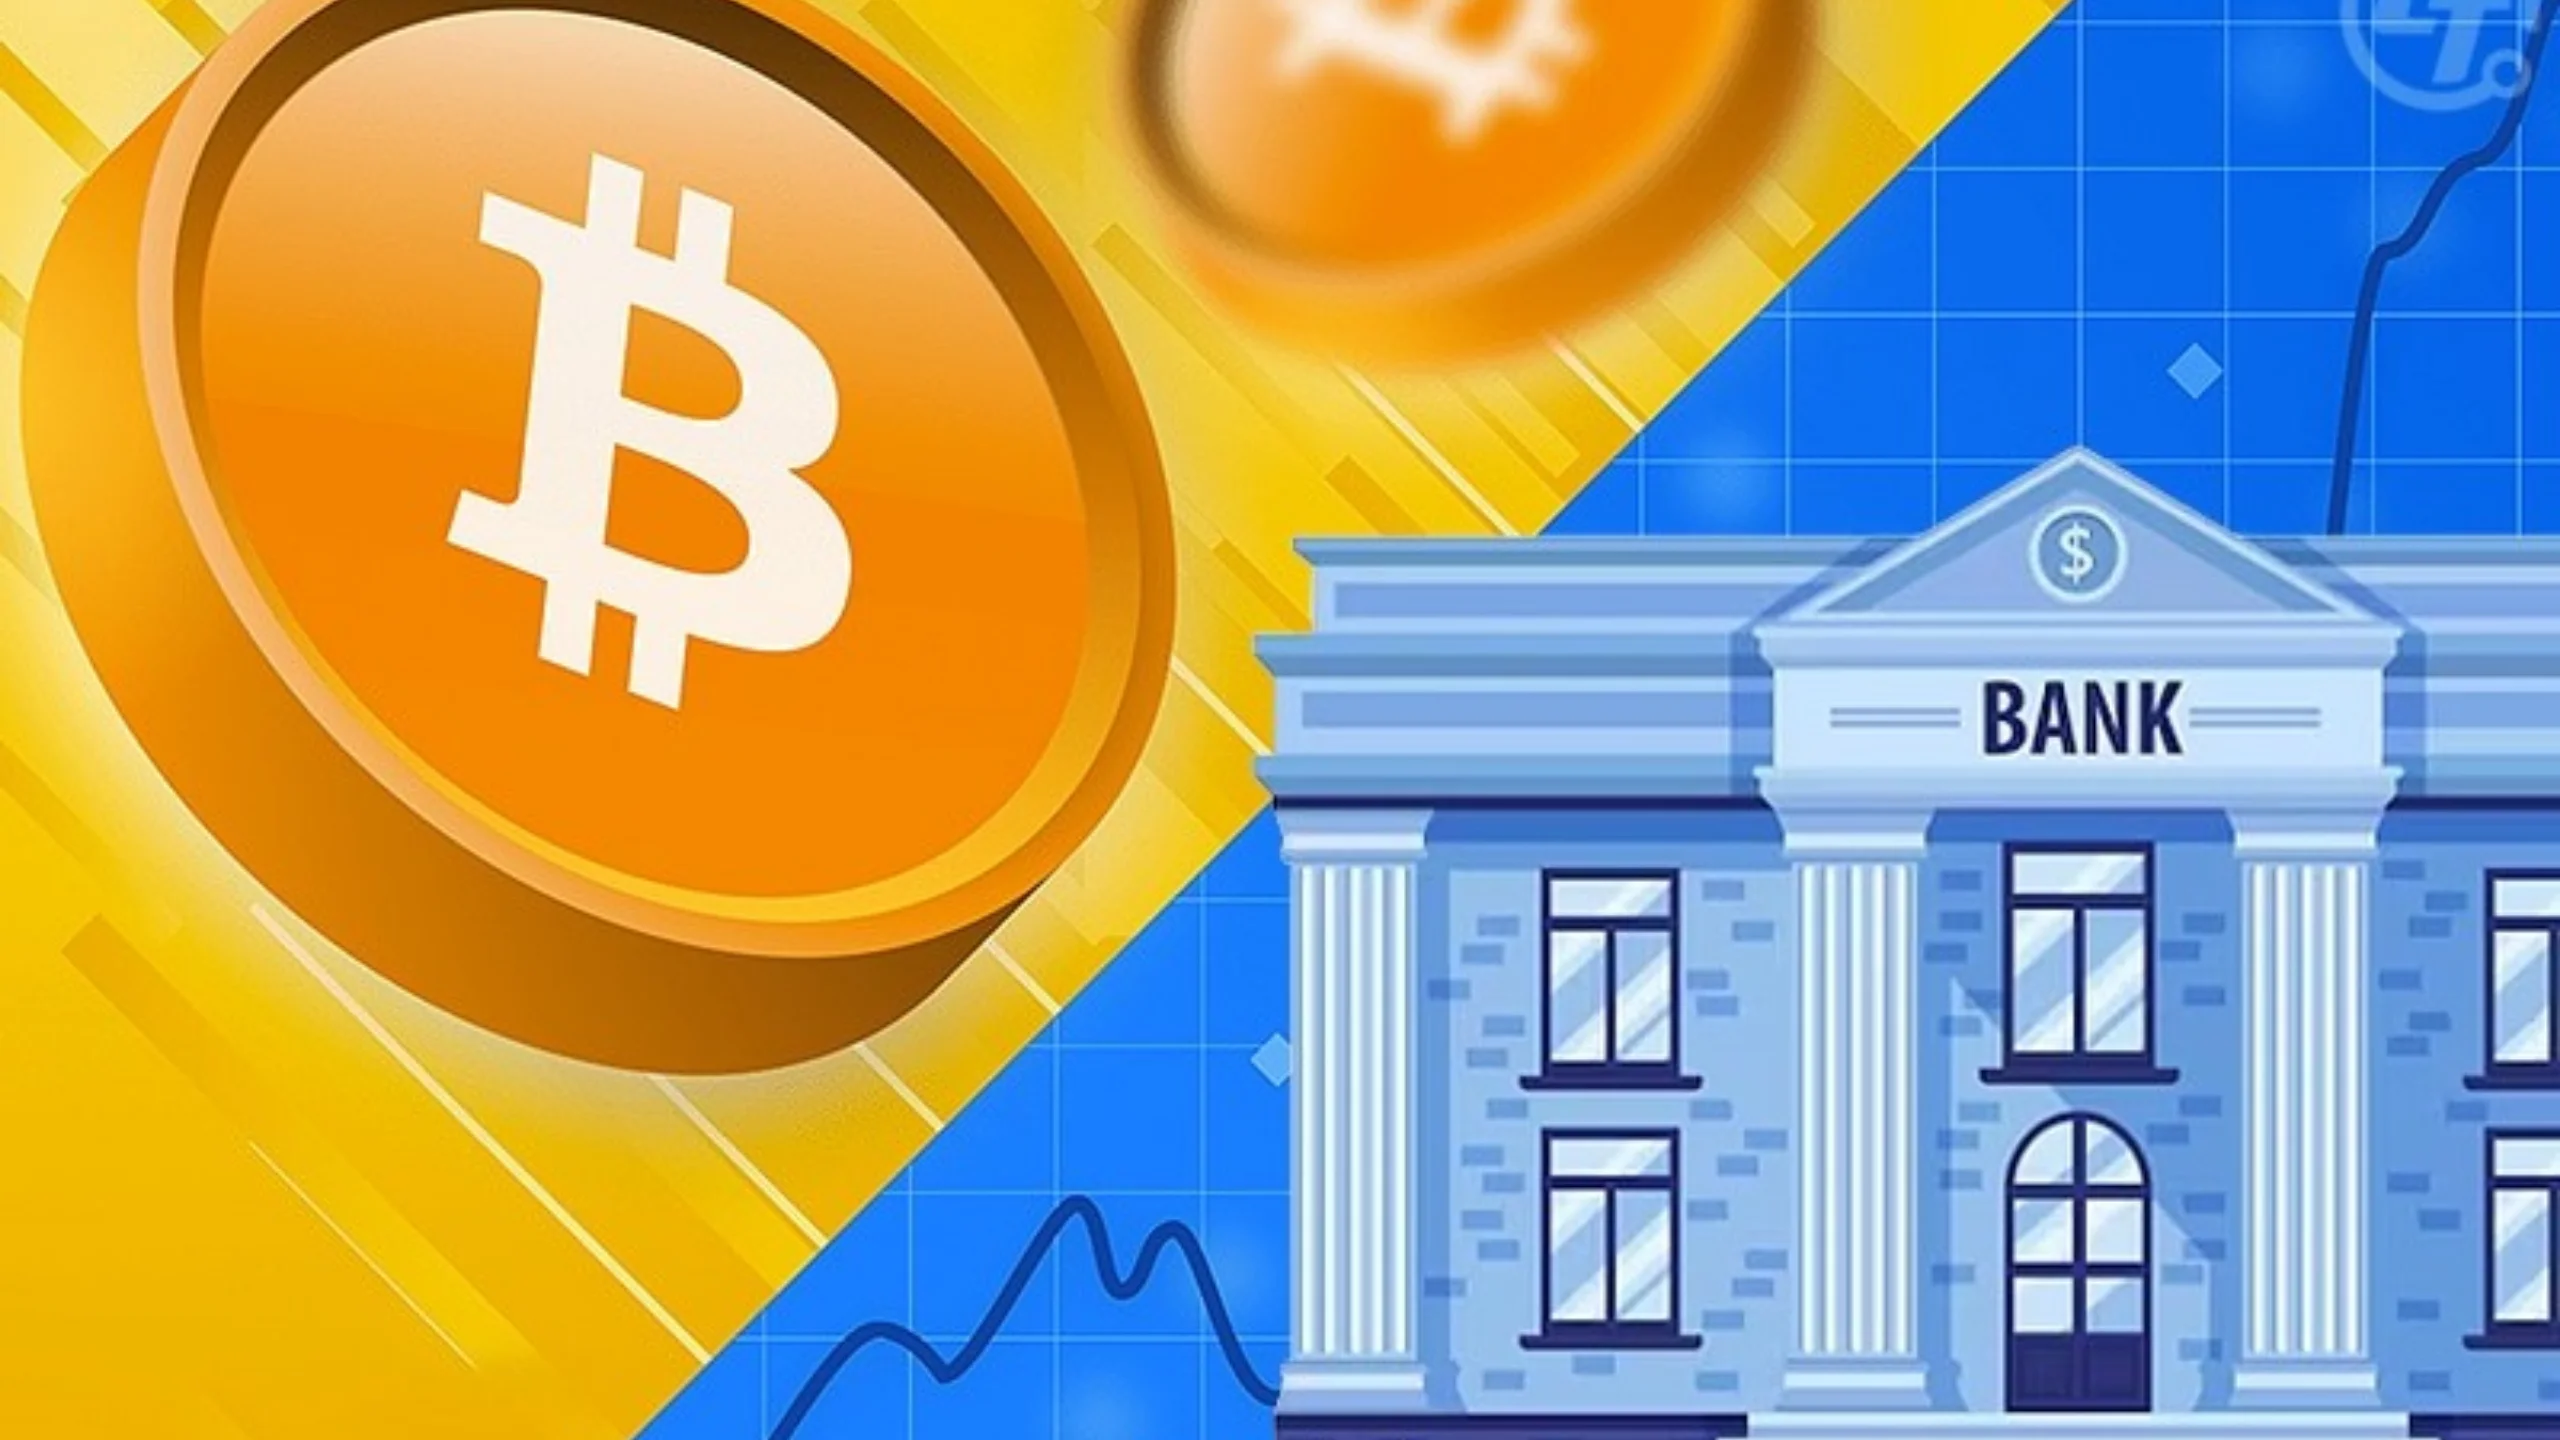 Banking and Cryptocurrency